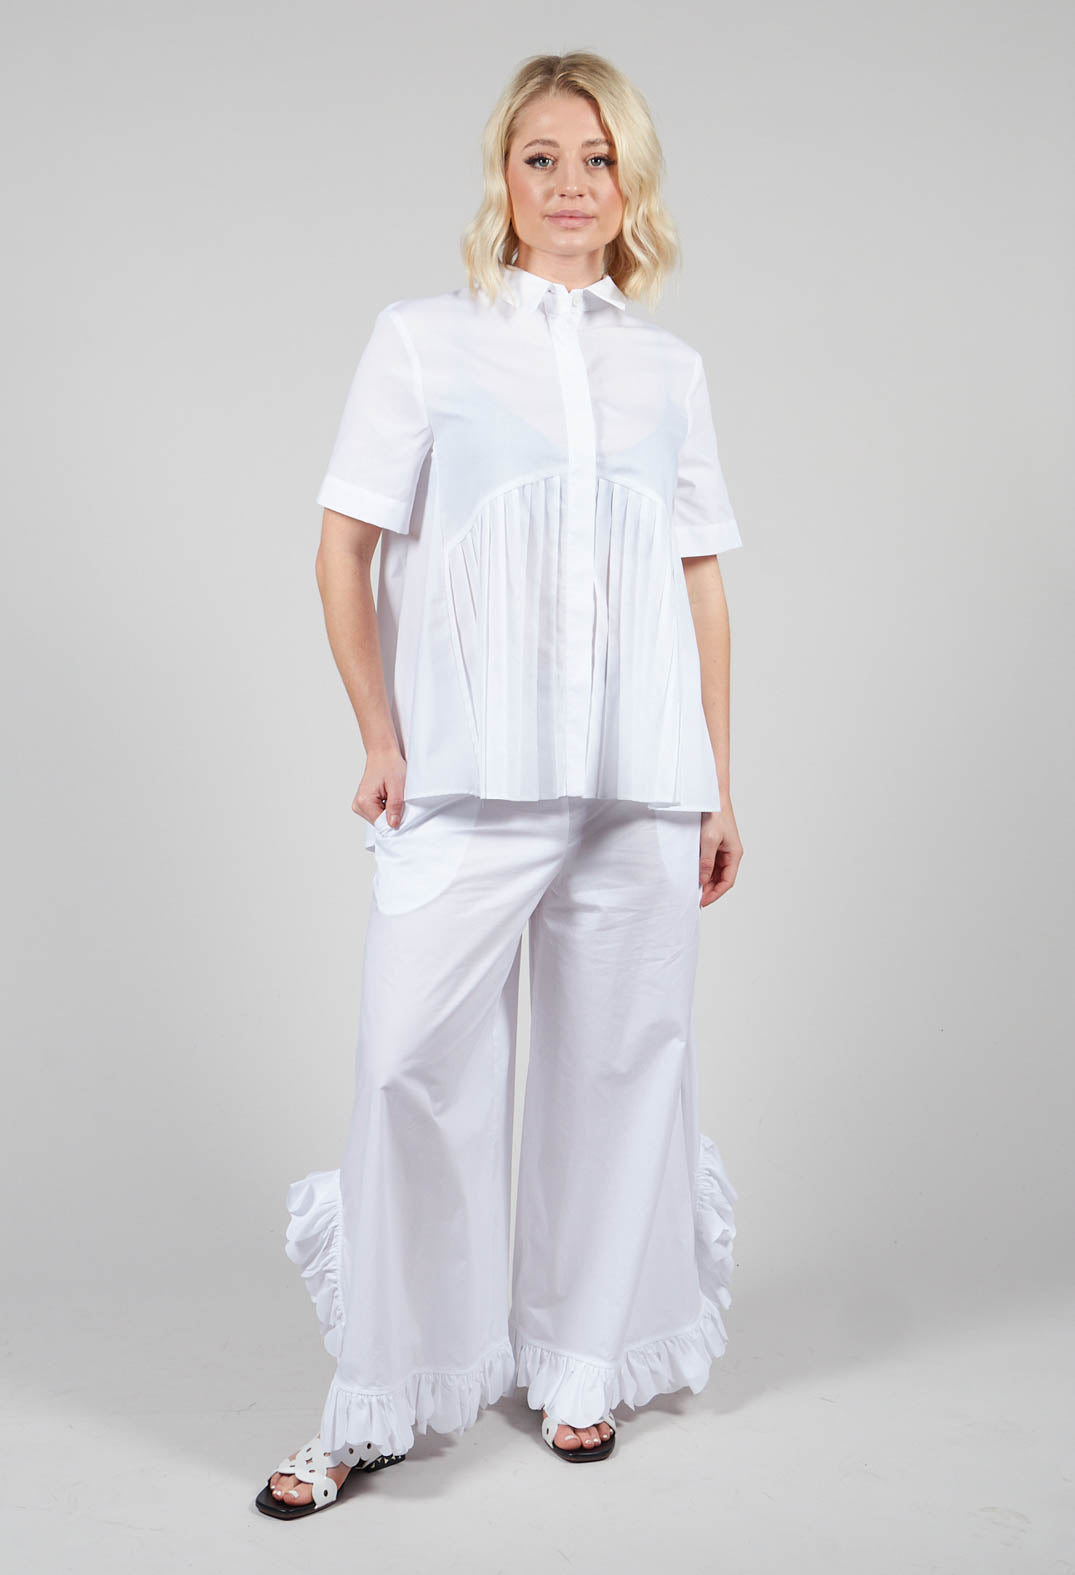 Pleated Shirt in White